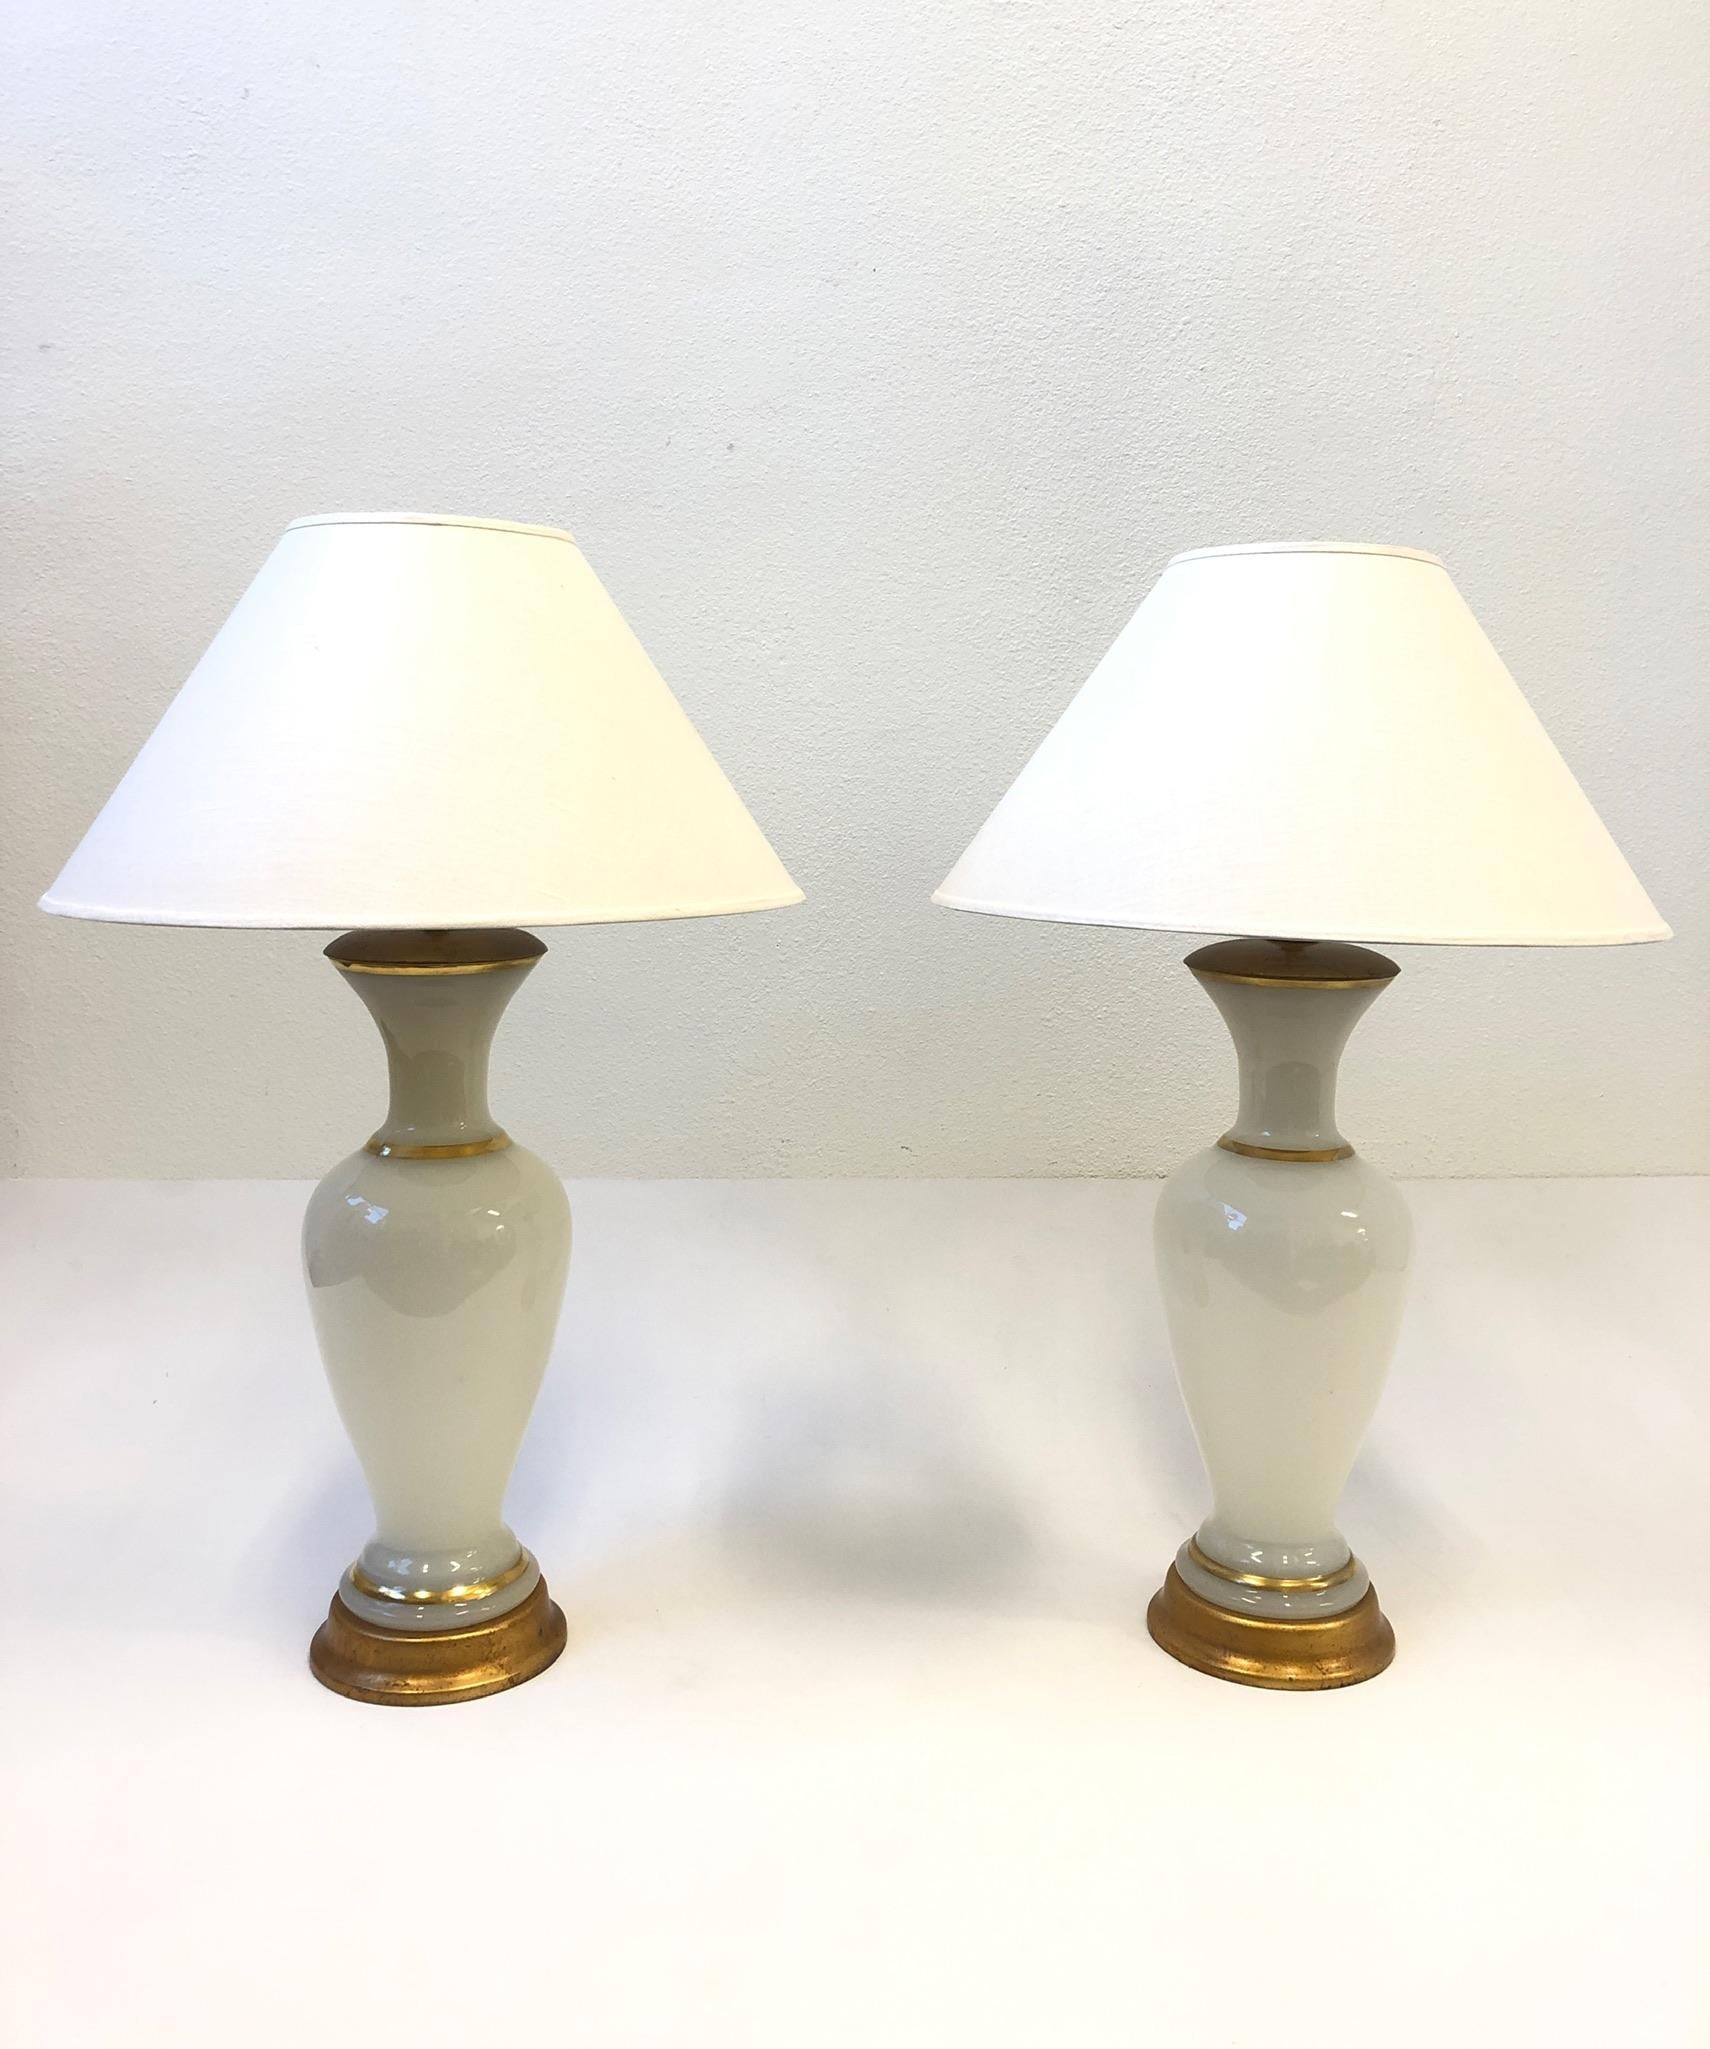 Italian Pair of White Murano Glass and Brass Table Lamps by Marbro